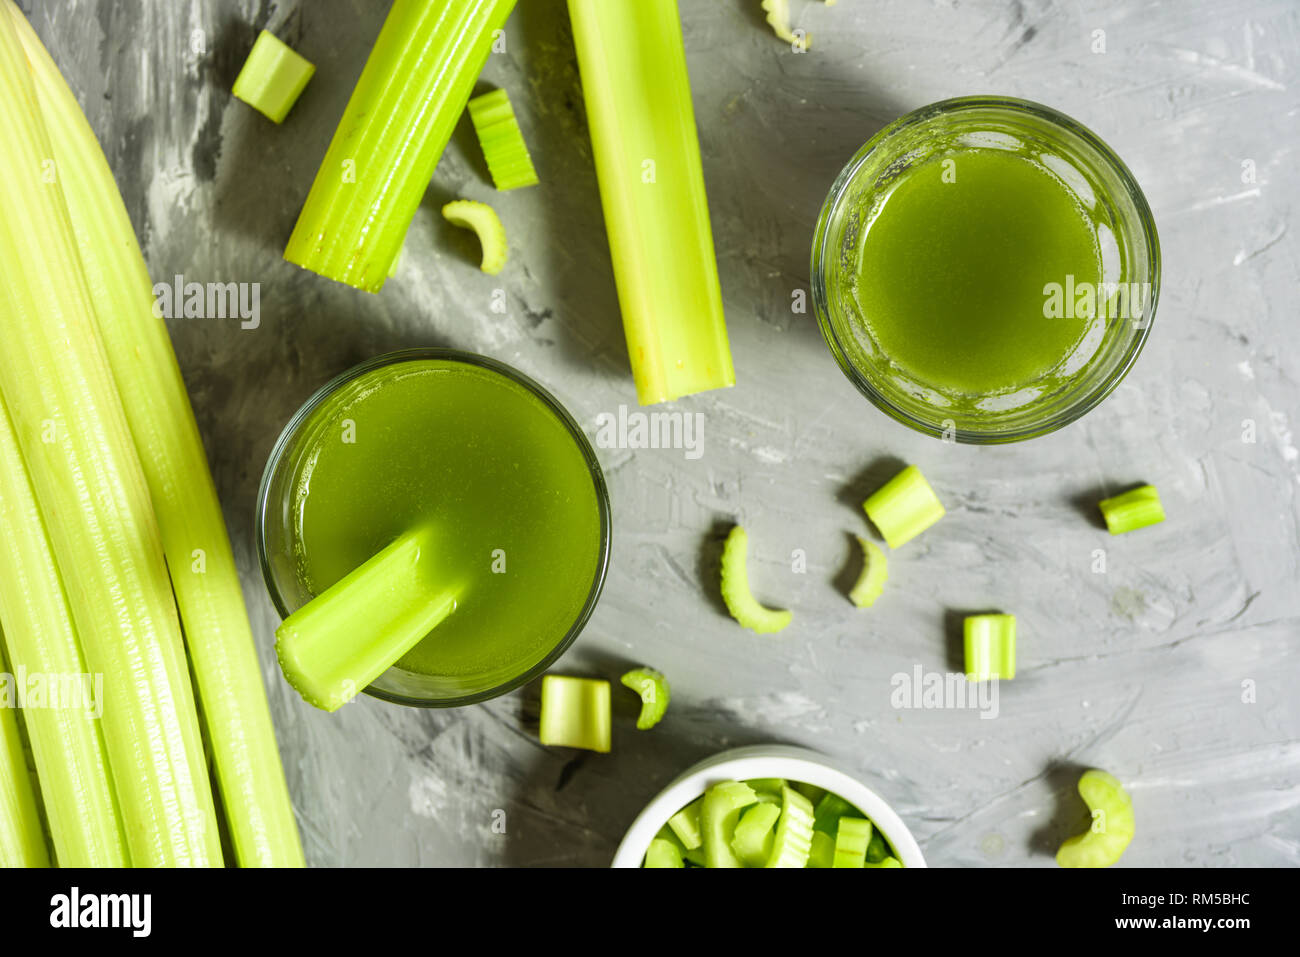 Celery Healthy Green Juice glasses top view on grey background Stock Photo